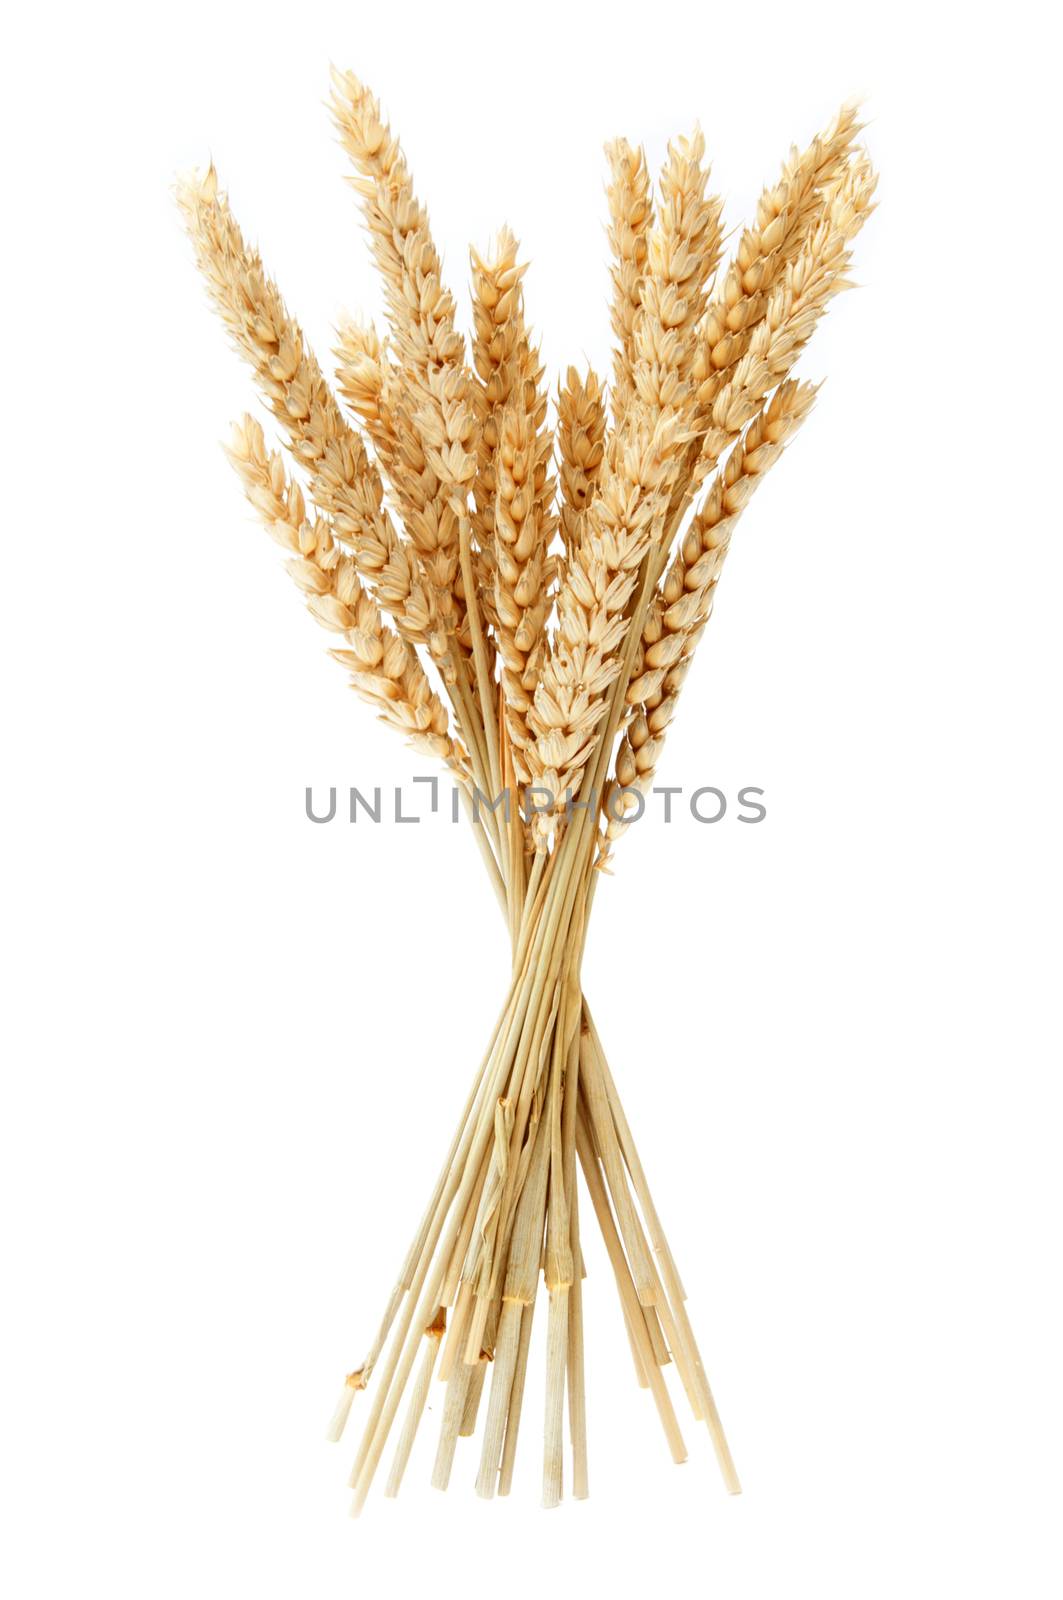 Wheat bundle over a white background